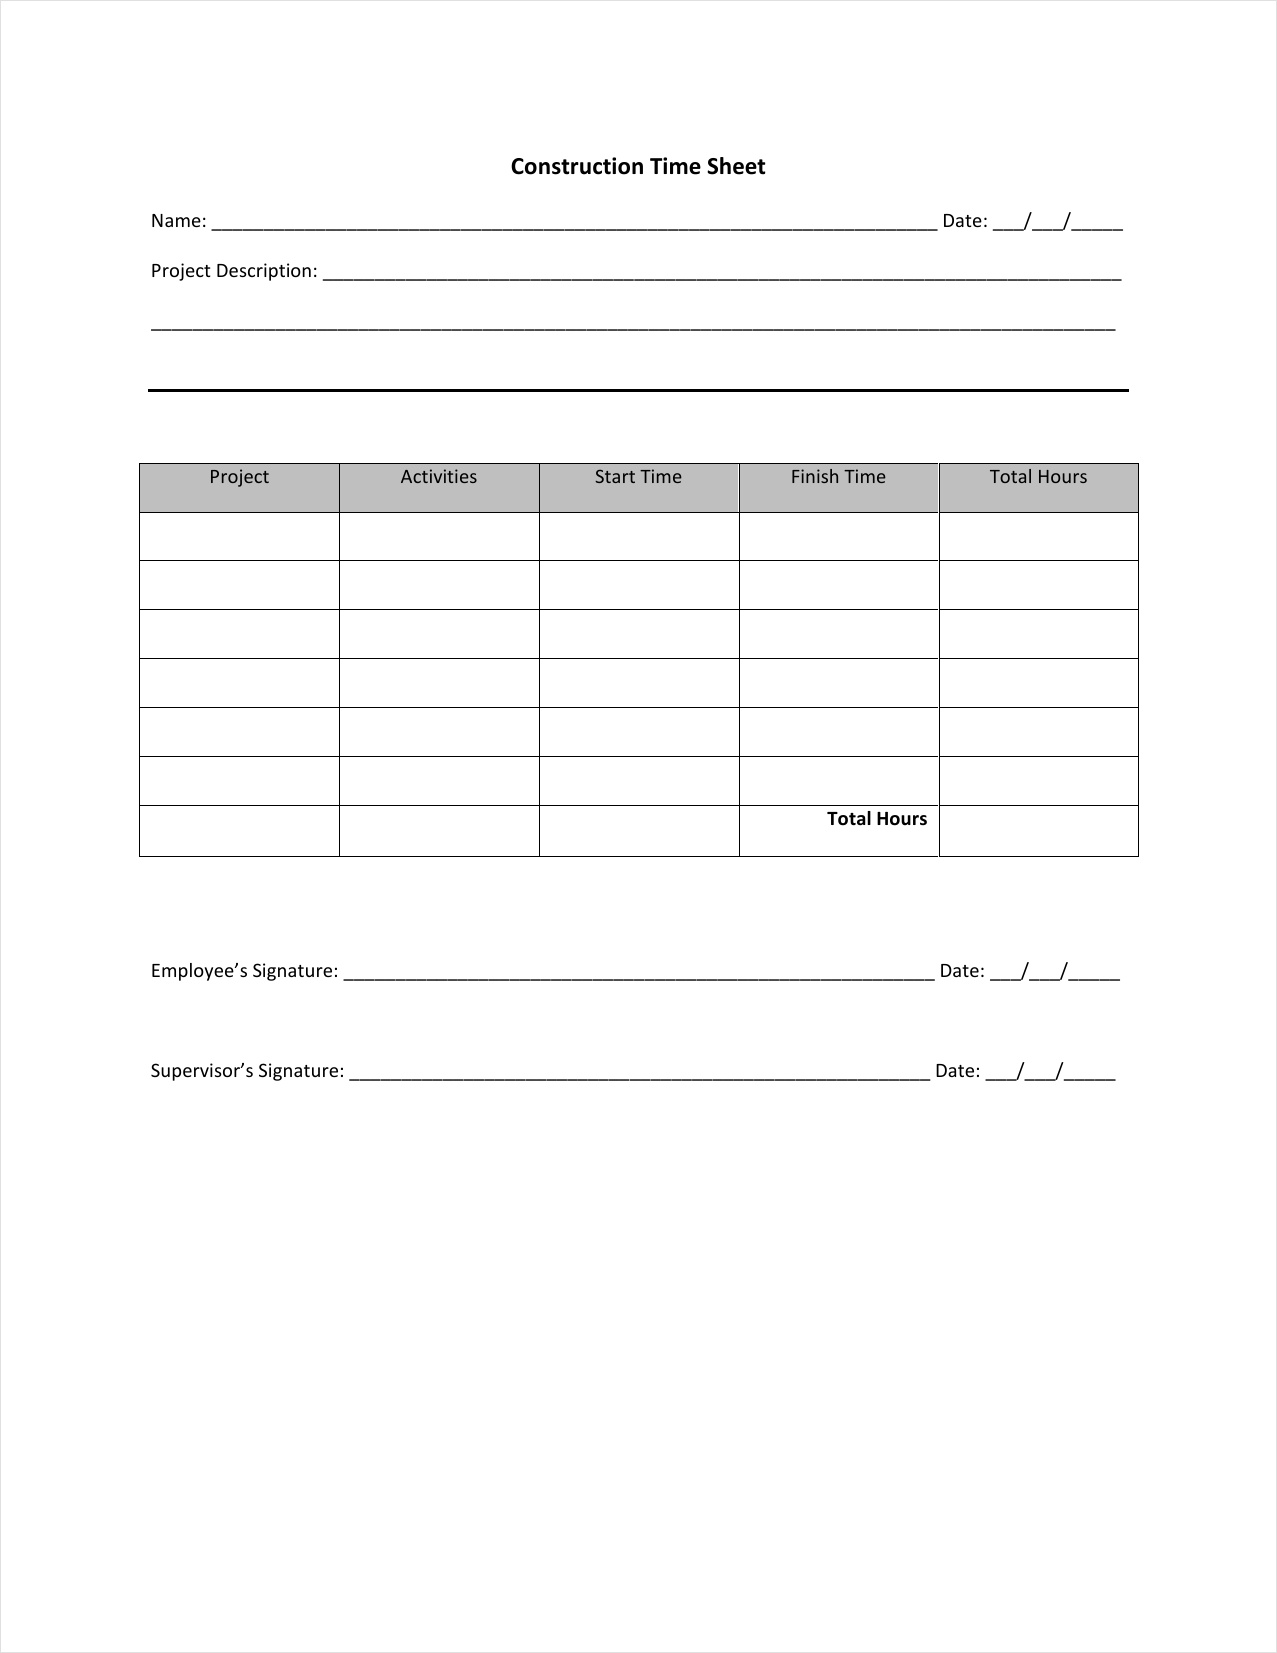 example of construction timesheet template